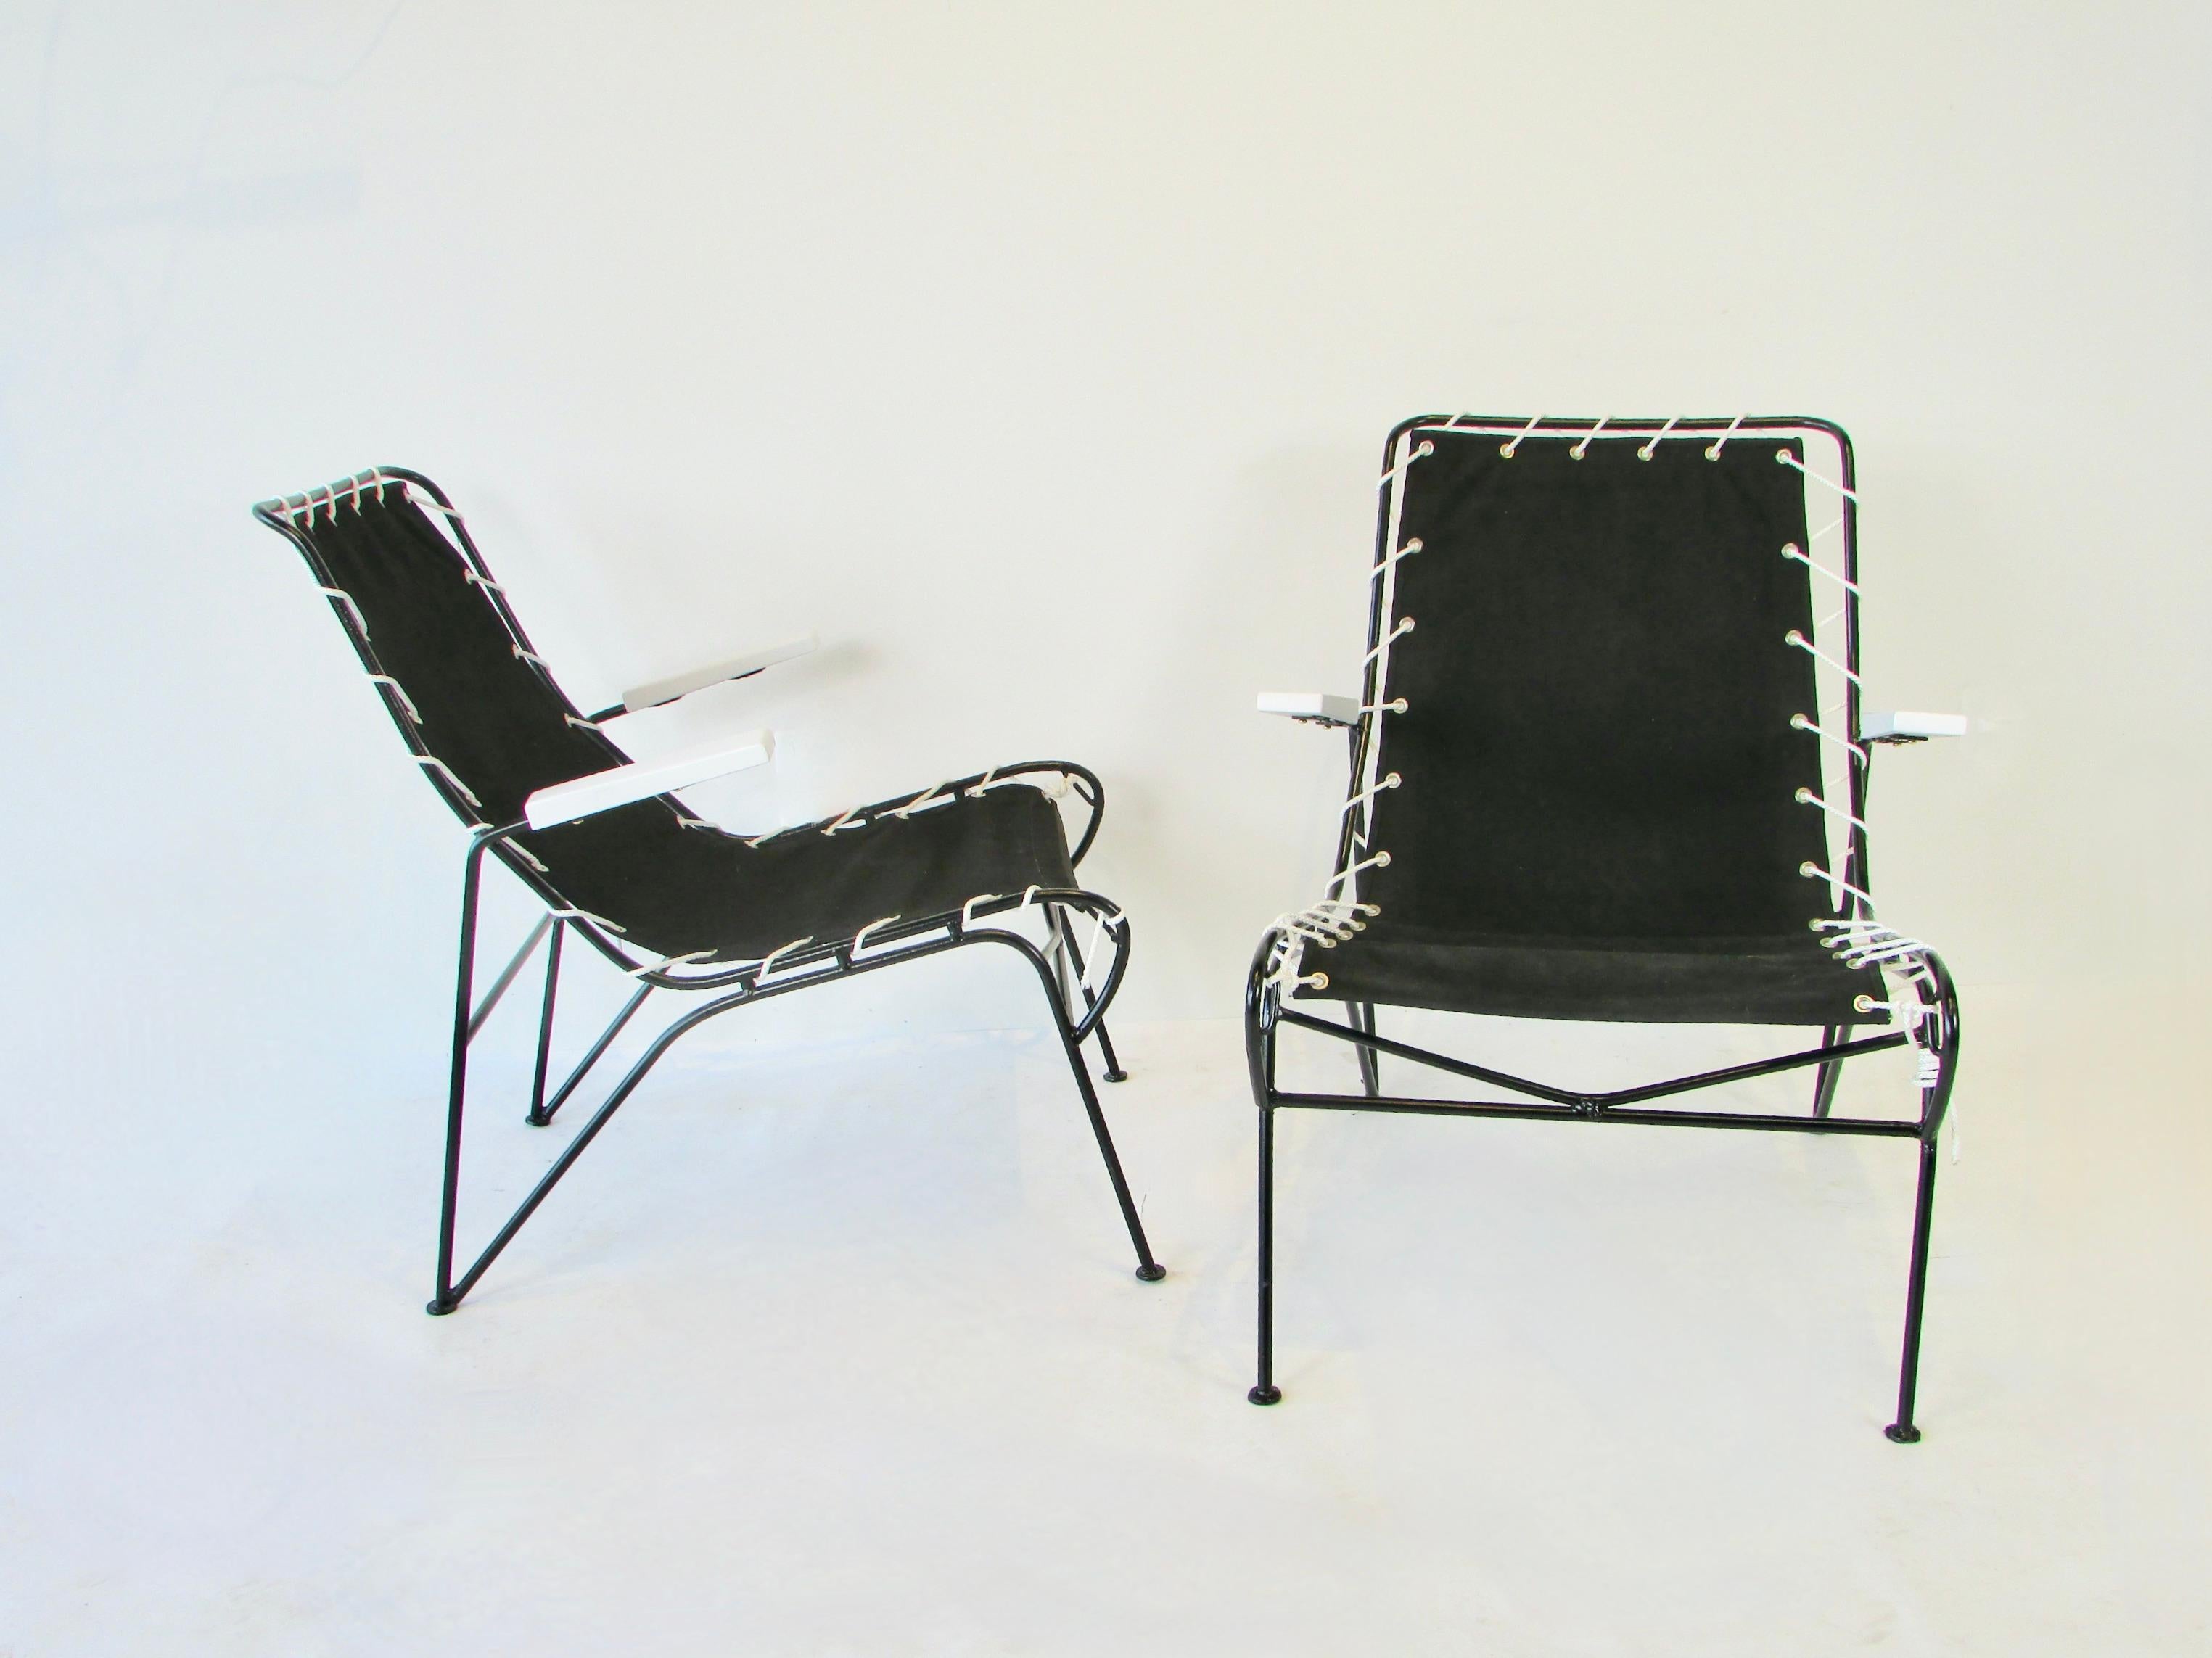 Pair of lounge chairs from the Ficks Reed Sol - Air line. Designed be husband wife team of Pipsin Saarinen and Robert Swanson. Black powder coated wrought iron frames hold white lacquered wood arms wrapped with white cord holding black canvas